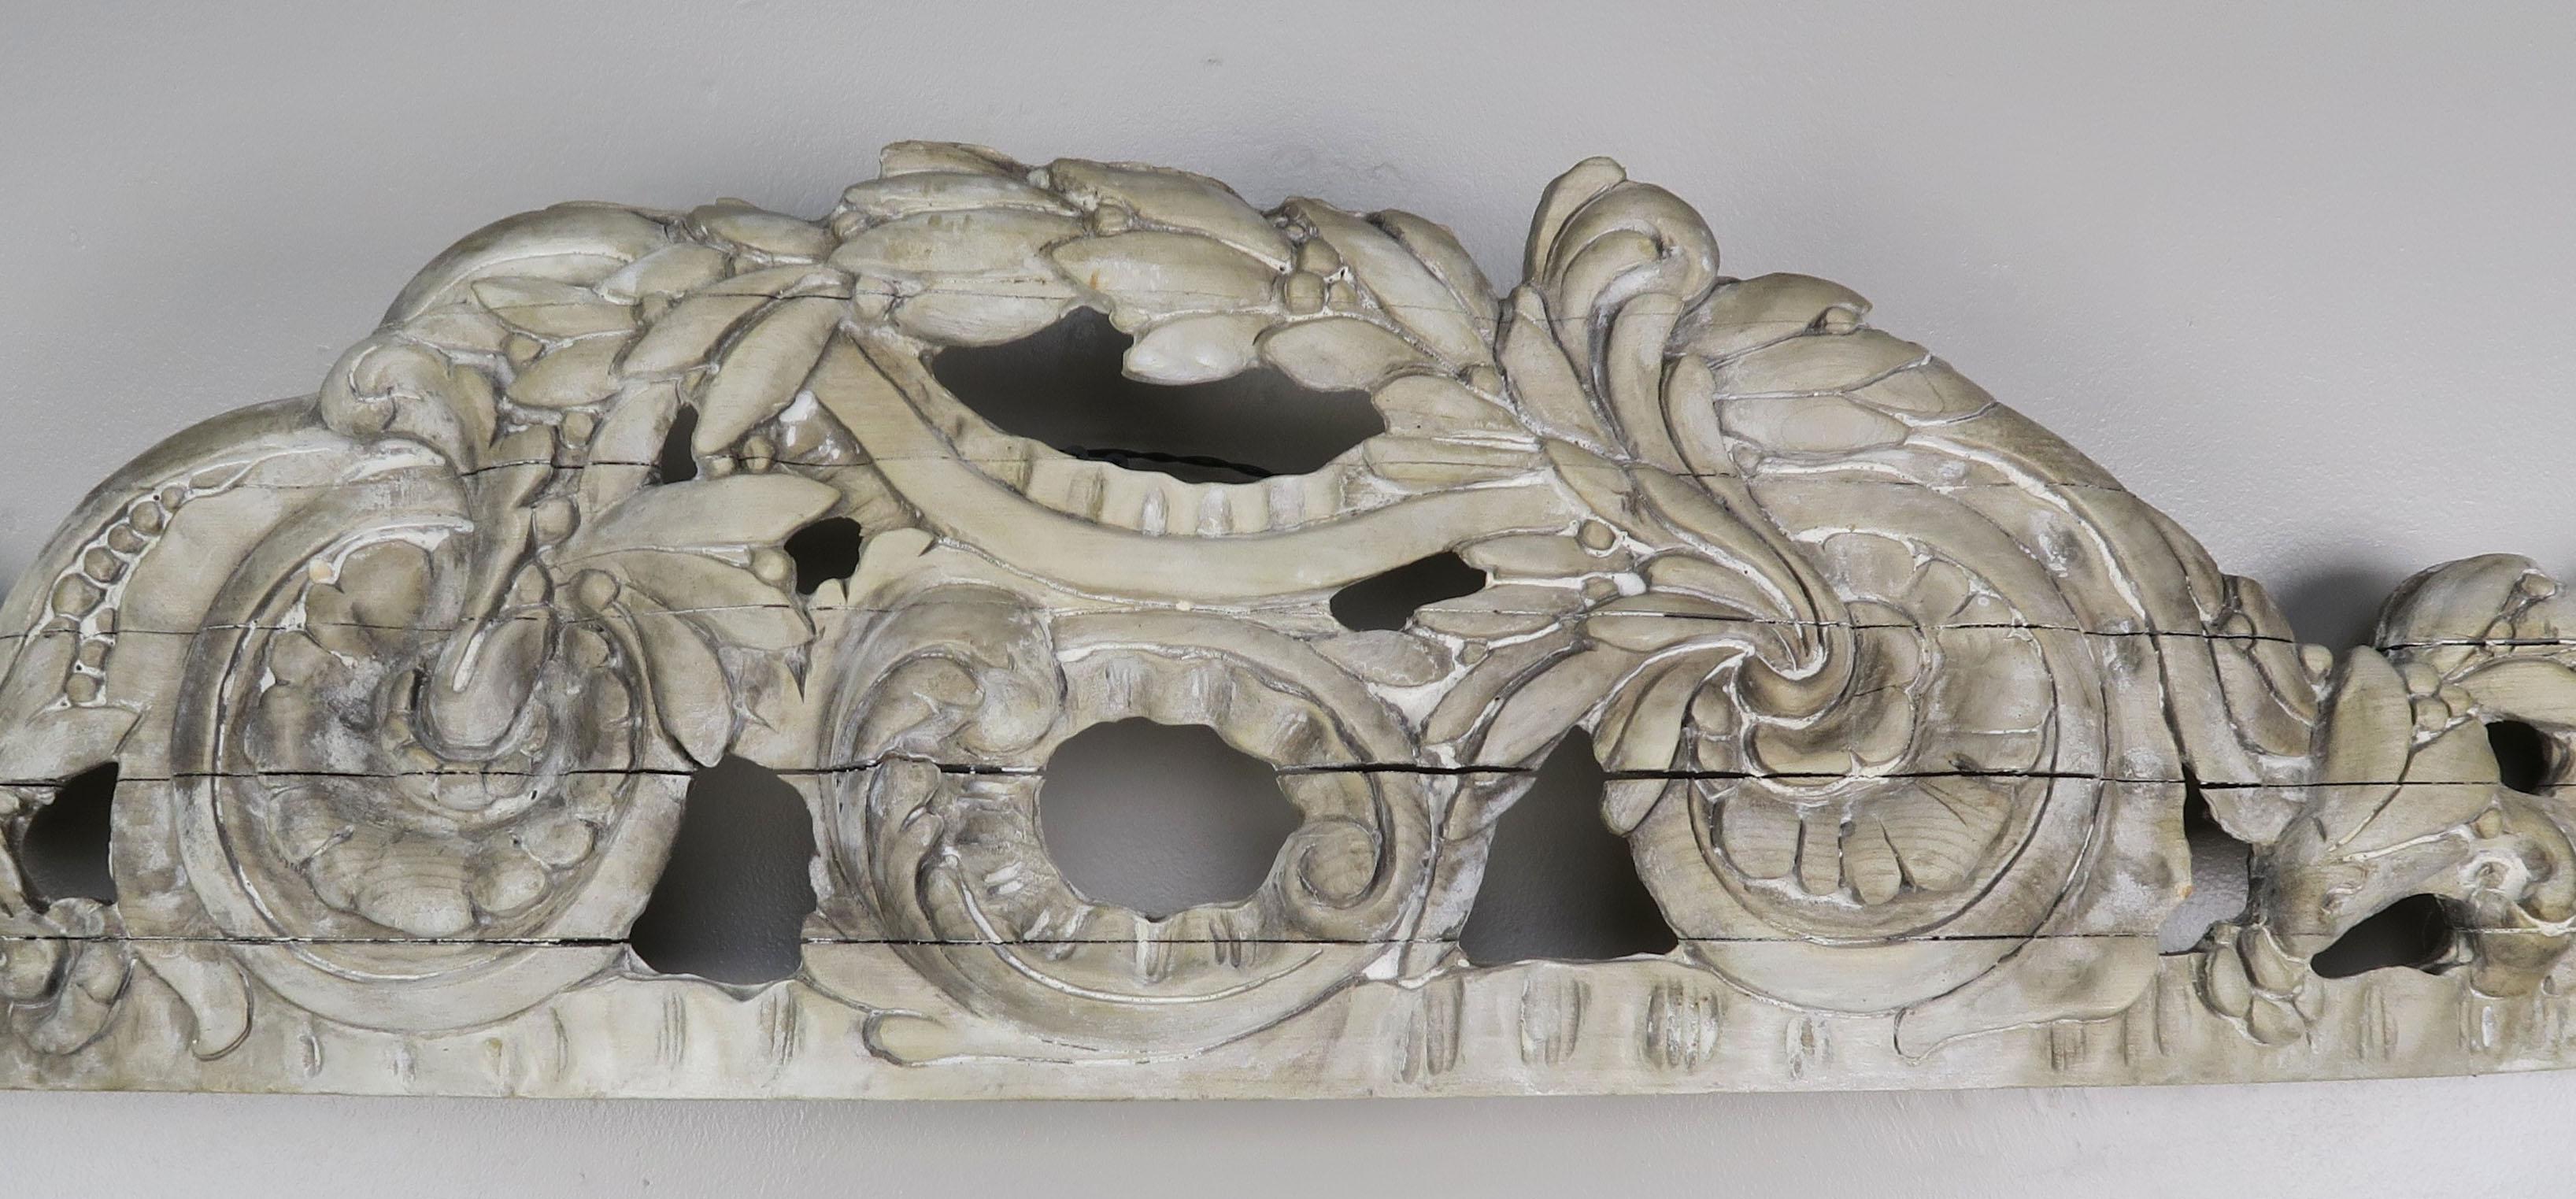 Italian wood carving that has a slight arch which would make it a perfect bed canopy with fabric draping down underneath or on its own over a door or window. Natural wood finish with tiny remnants of paint.